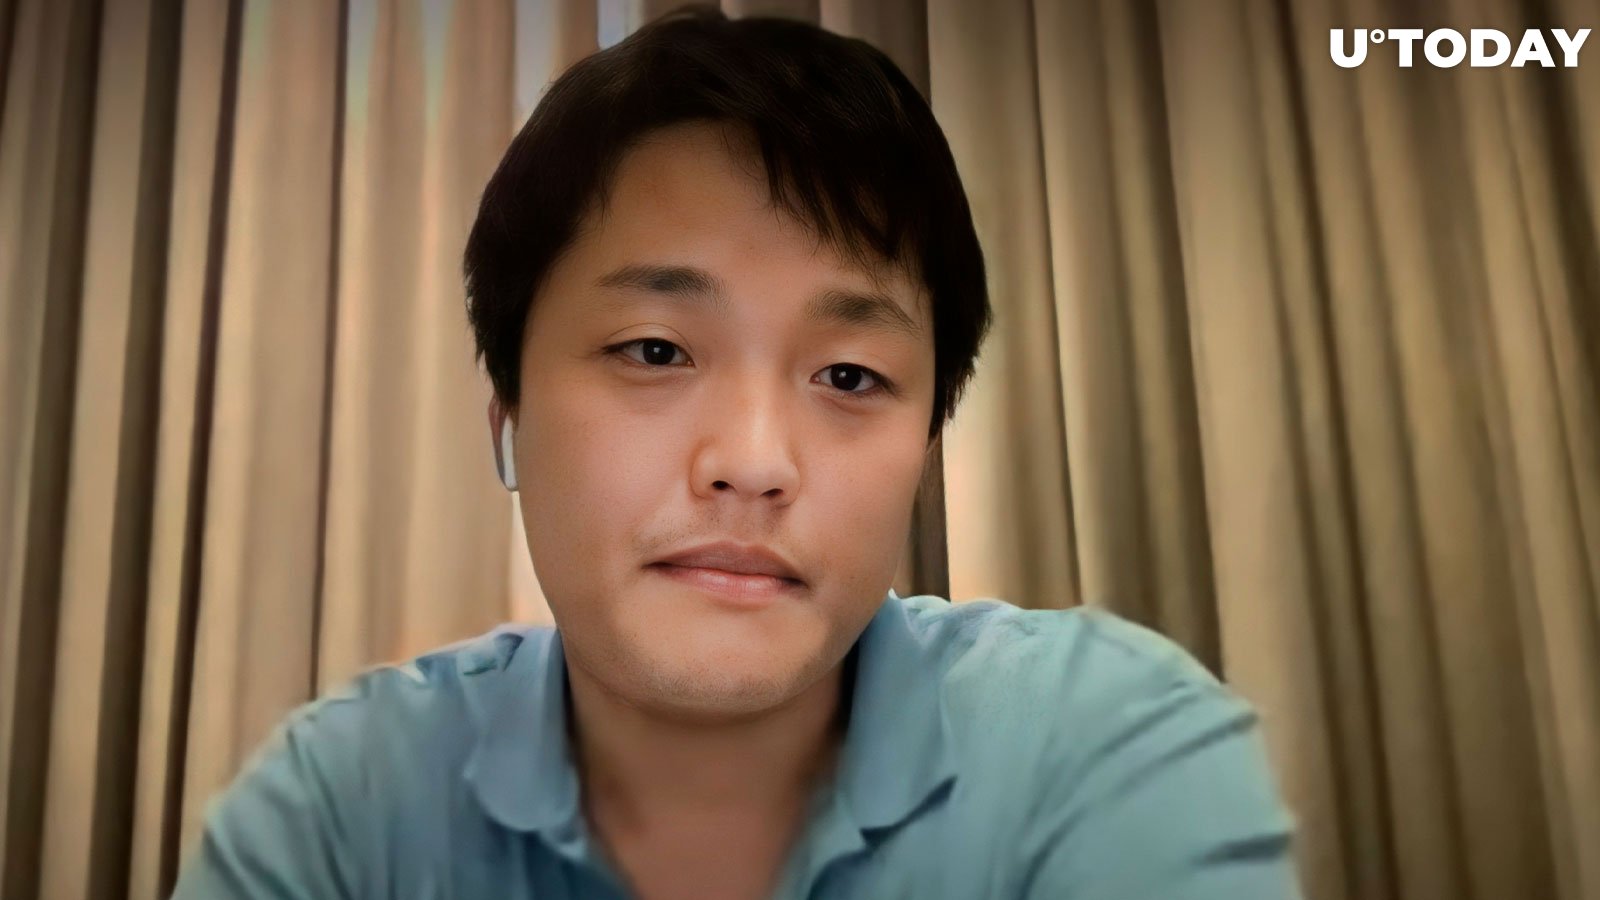 Terra’s Do Kwon Denies Trying to Cash Out Bitcoin Fortune Shortly After Arrest Warrant